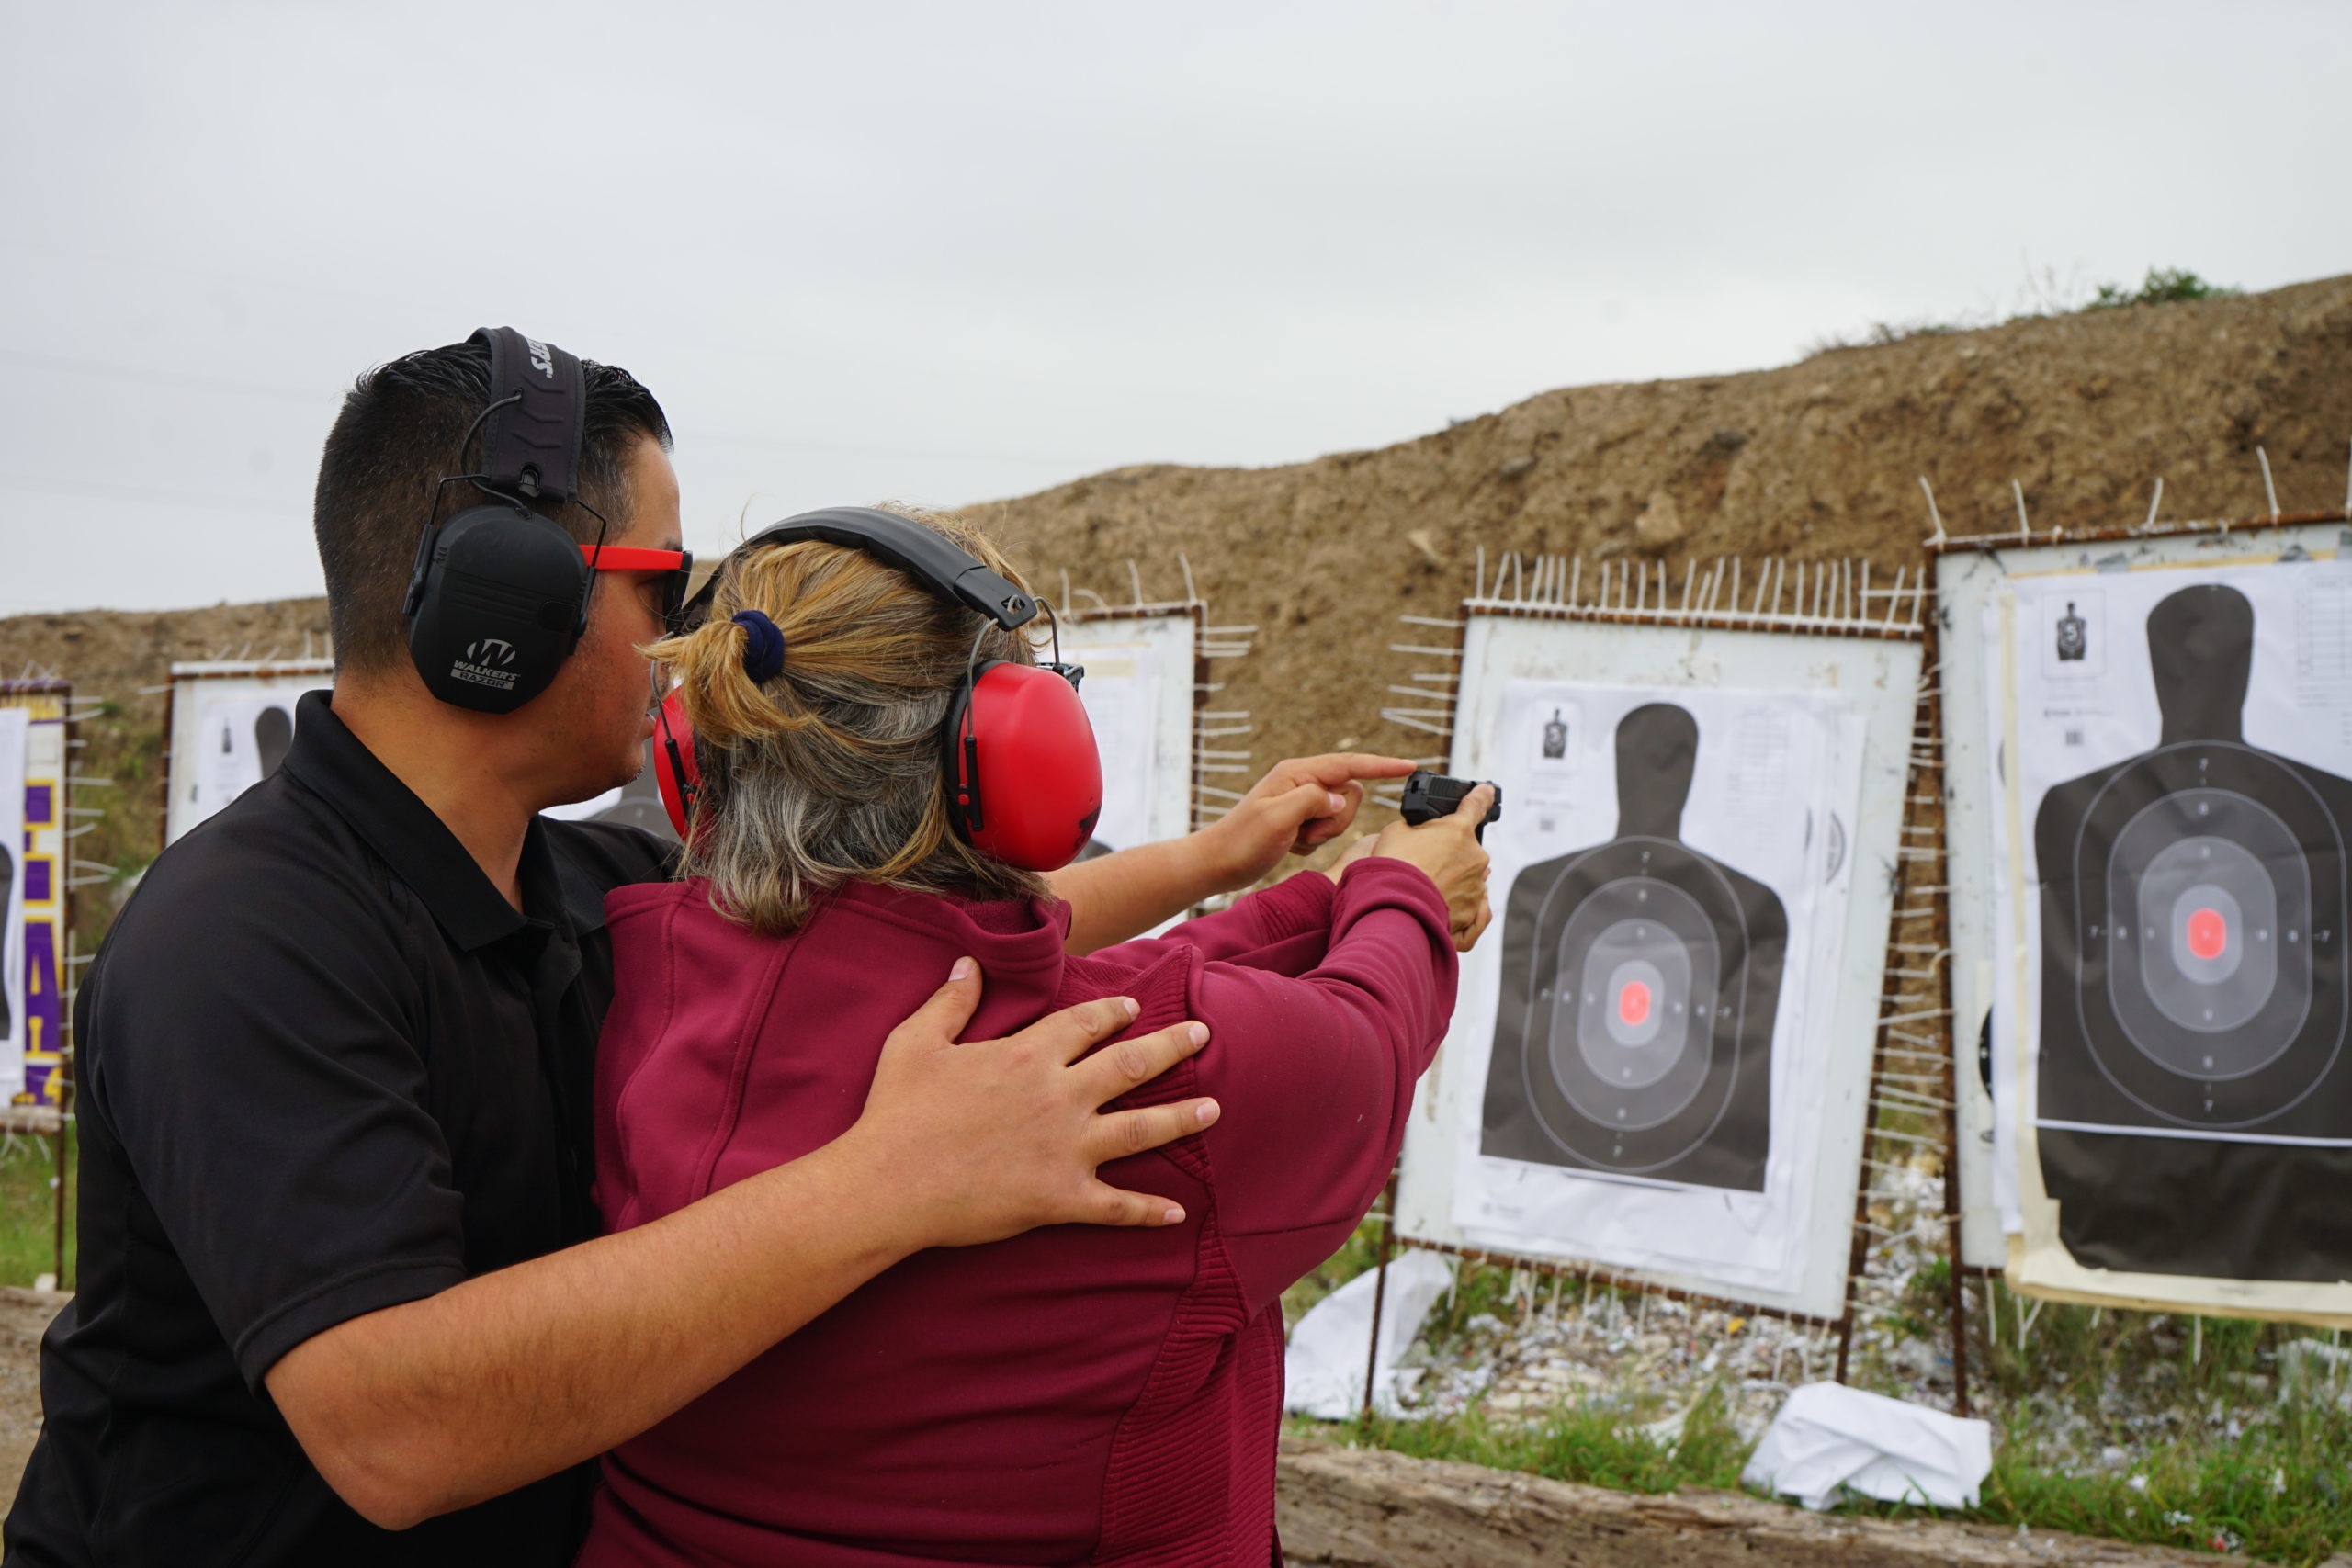 Report from Texas: Why More Latinos Are Arming Themselves